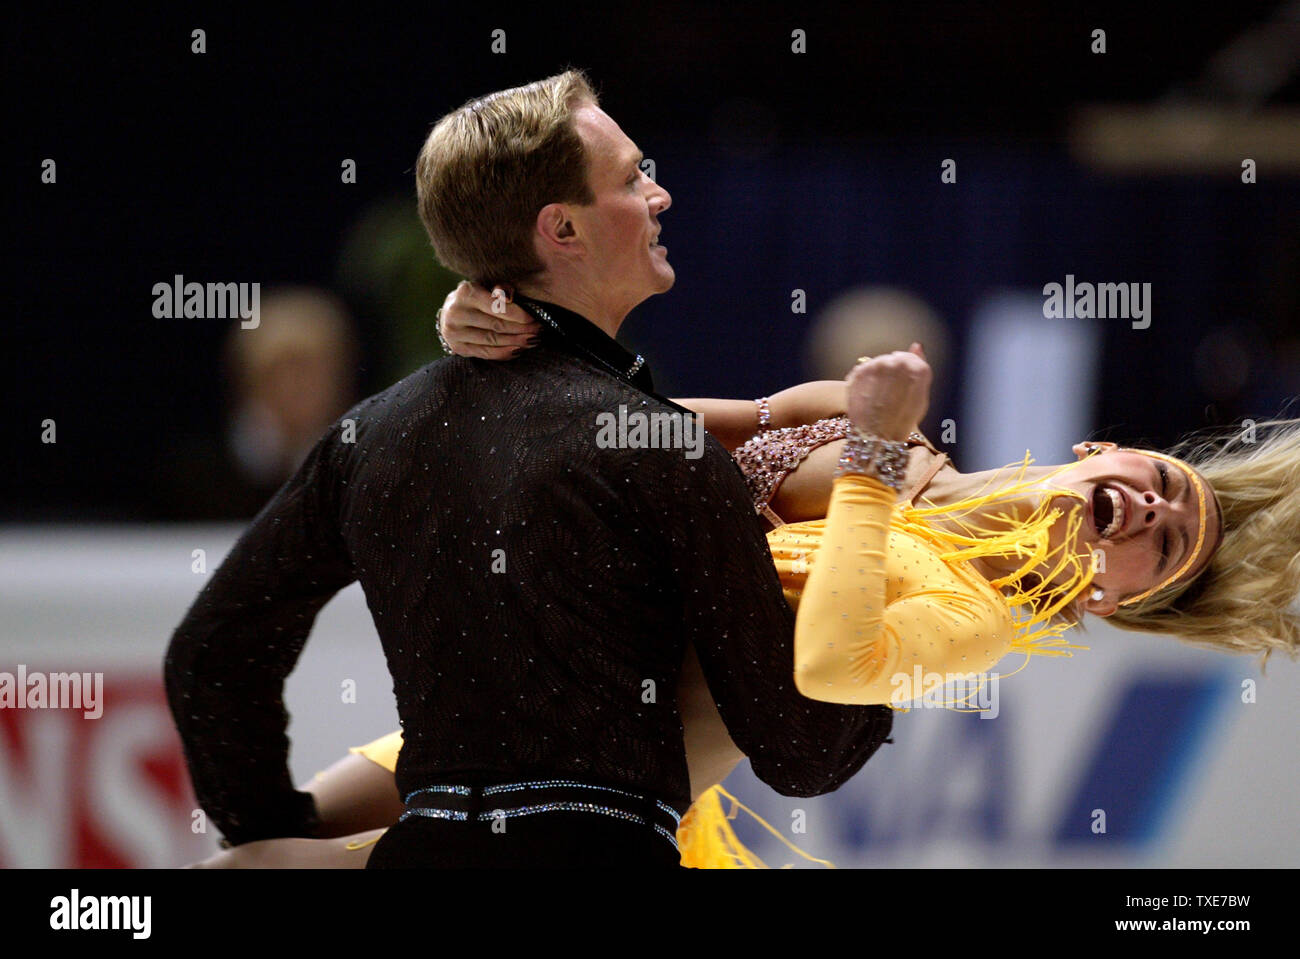 (L-R) ROMAN KOSTOMAROV and TATIANA NAVKA of Russia compete in Ice Dancing and currently hold 1st place at 2004 World Figure Skating Champions through til Sunday. UPI Photo/Tom Theobald Stock Photo